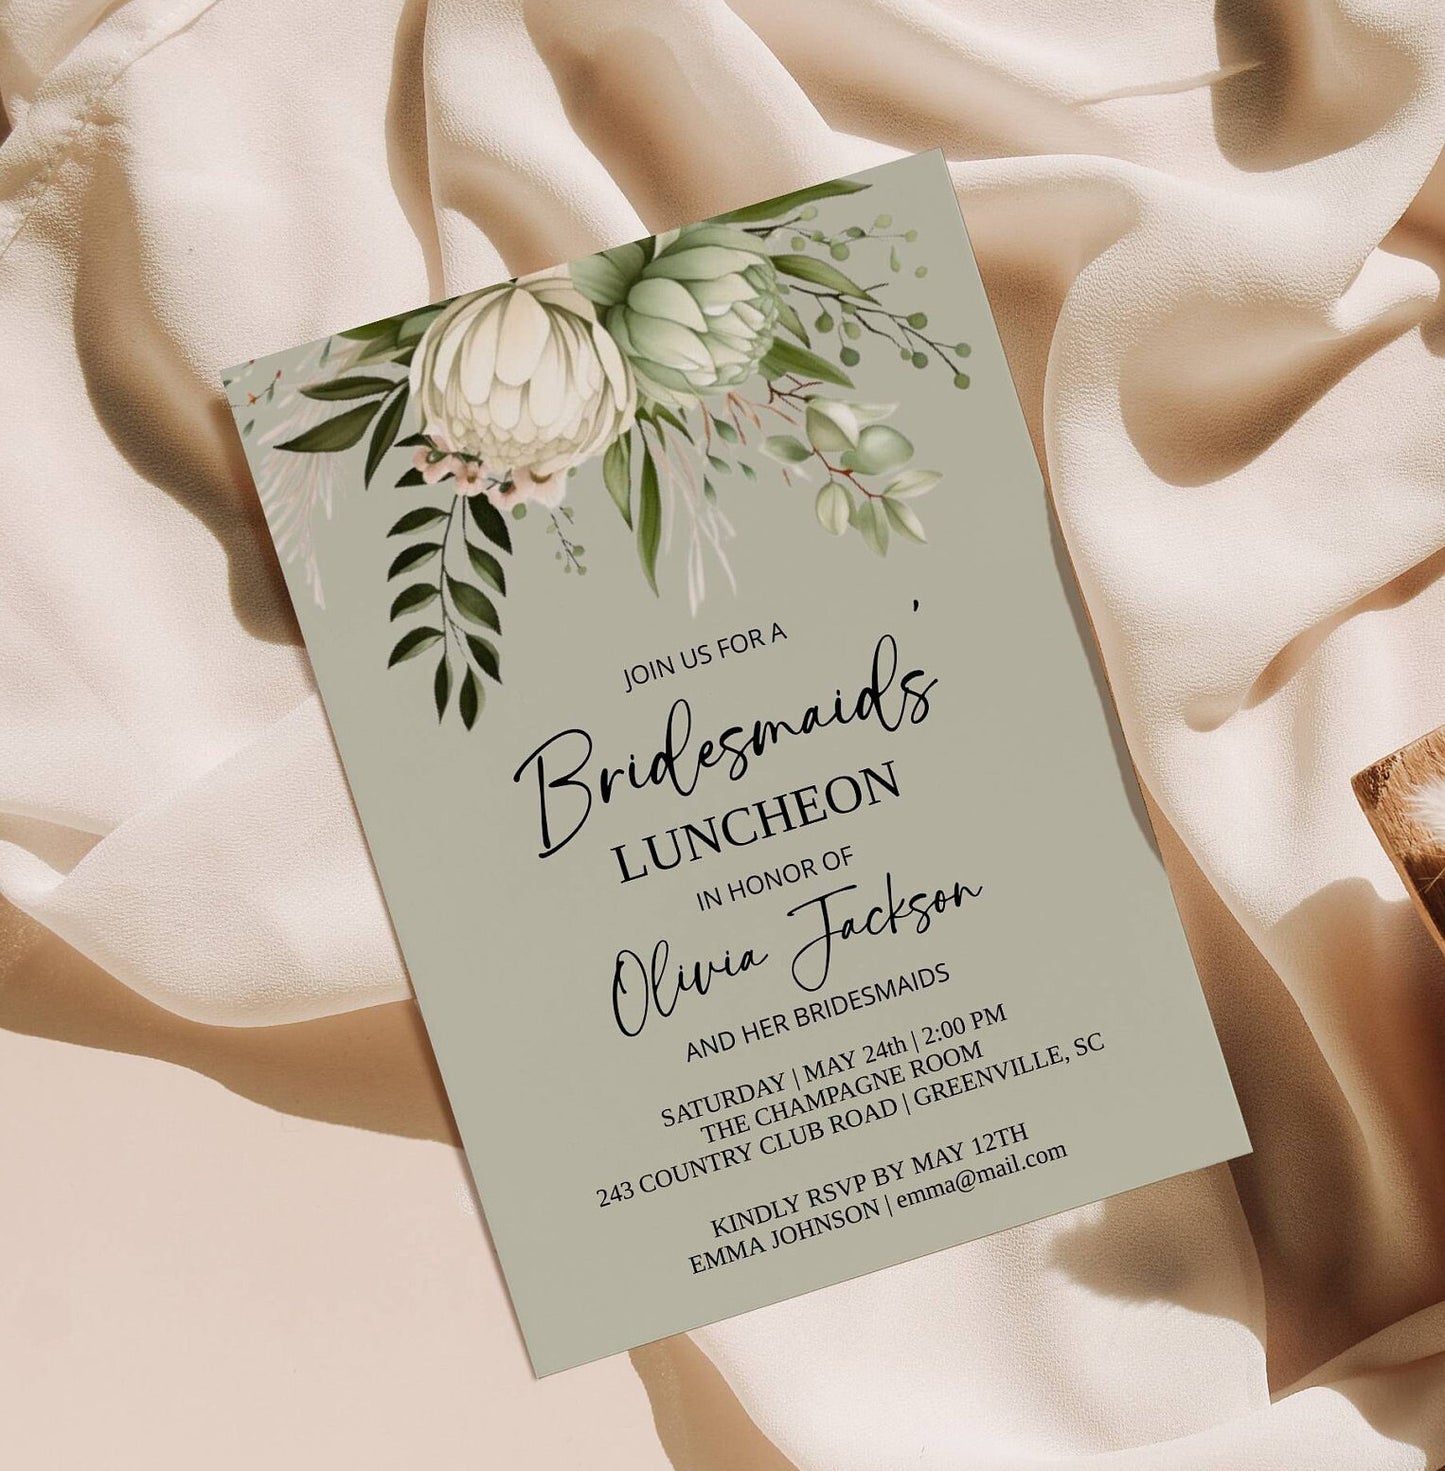 Bridesmaid Luncheon Invitation, Bridal Luncheon Invite, Brunch Invite, Brunch Invitation, Luncheon, Editable Template, Instant, Green Floral